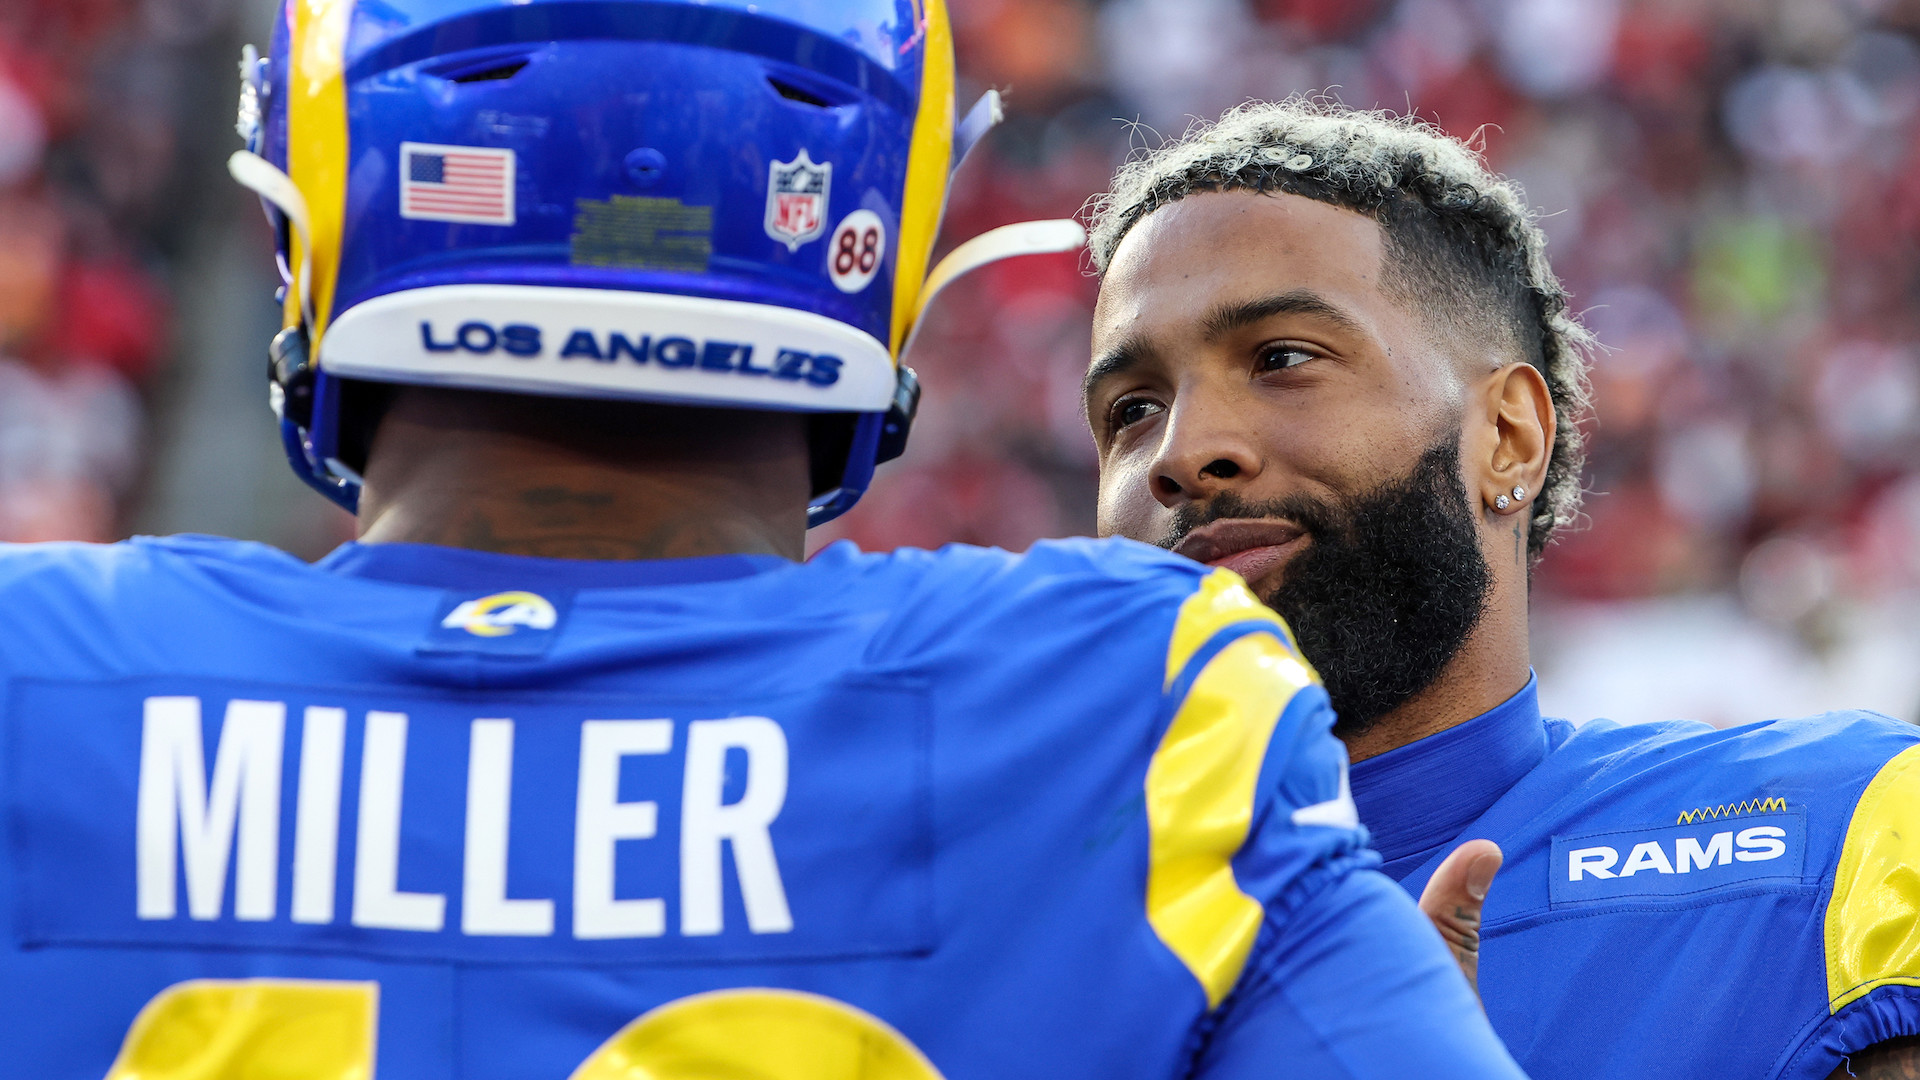 Odell Beckham Jr. and Von Miller during the Los Angeles Rams&#x27; game against the Tamba Bay Buccaneers